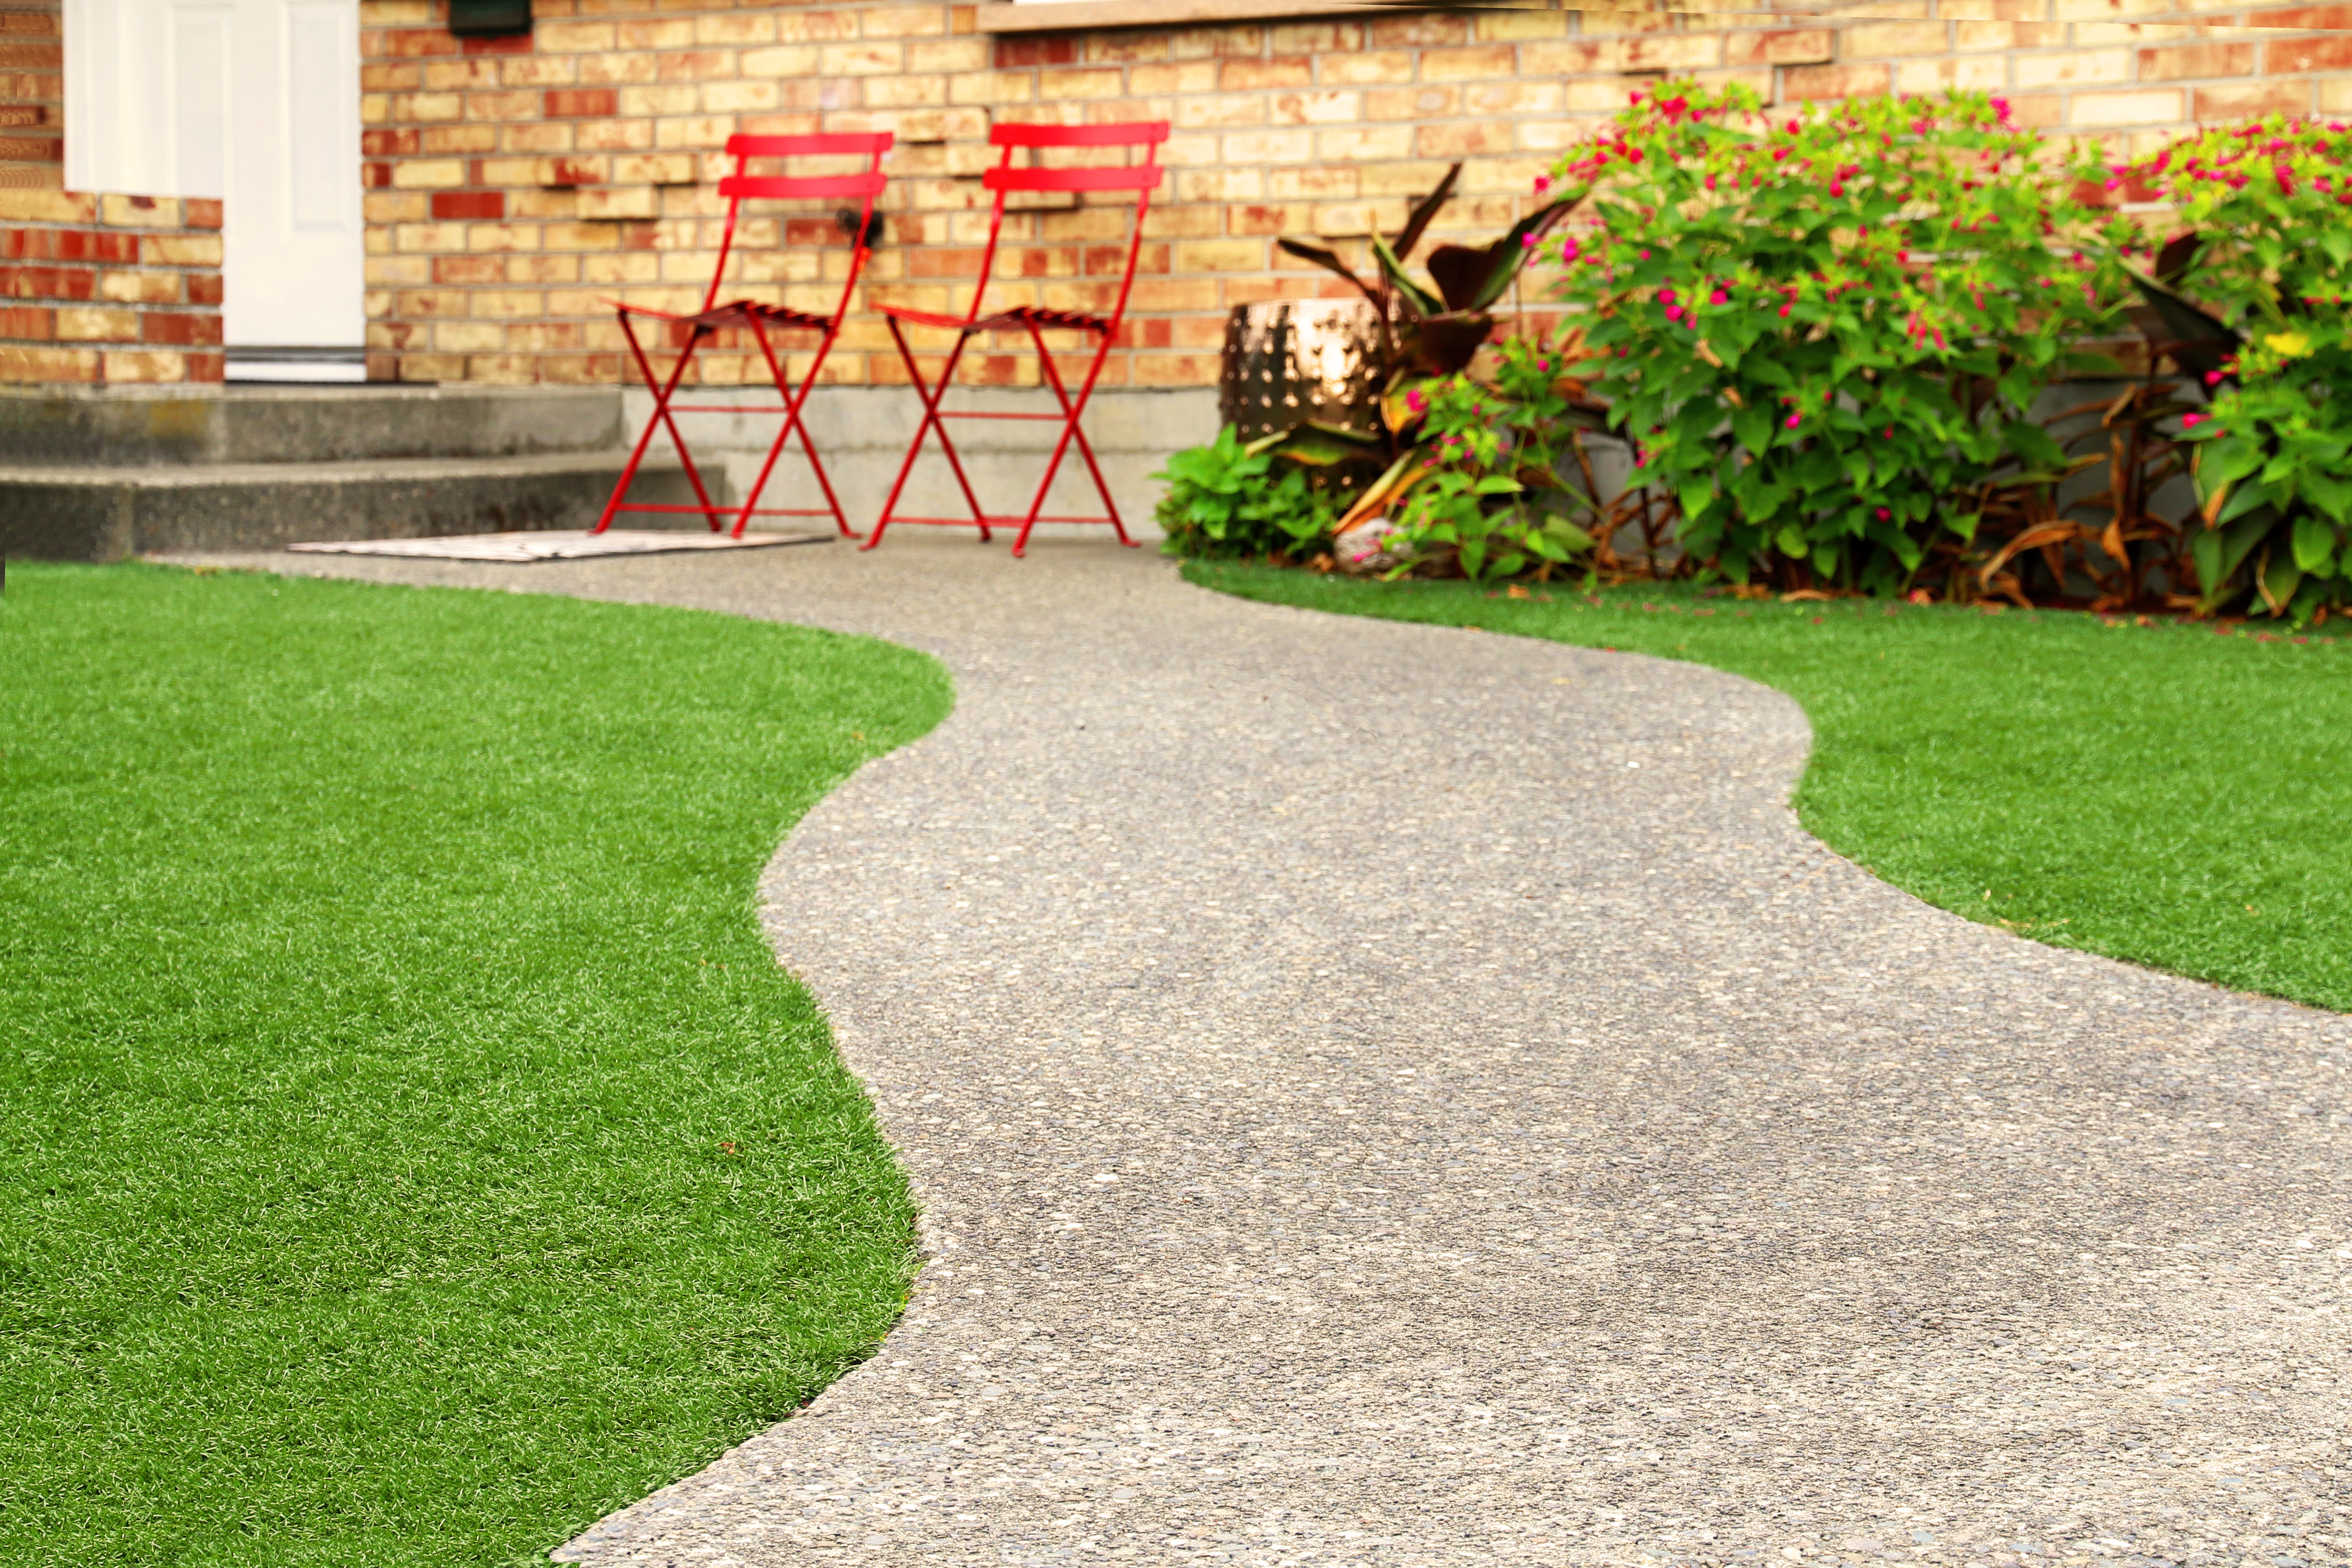 Artificial lawn or real lawn?